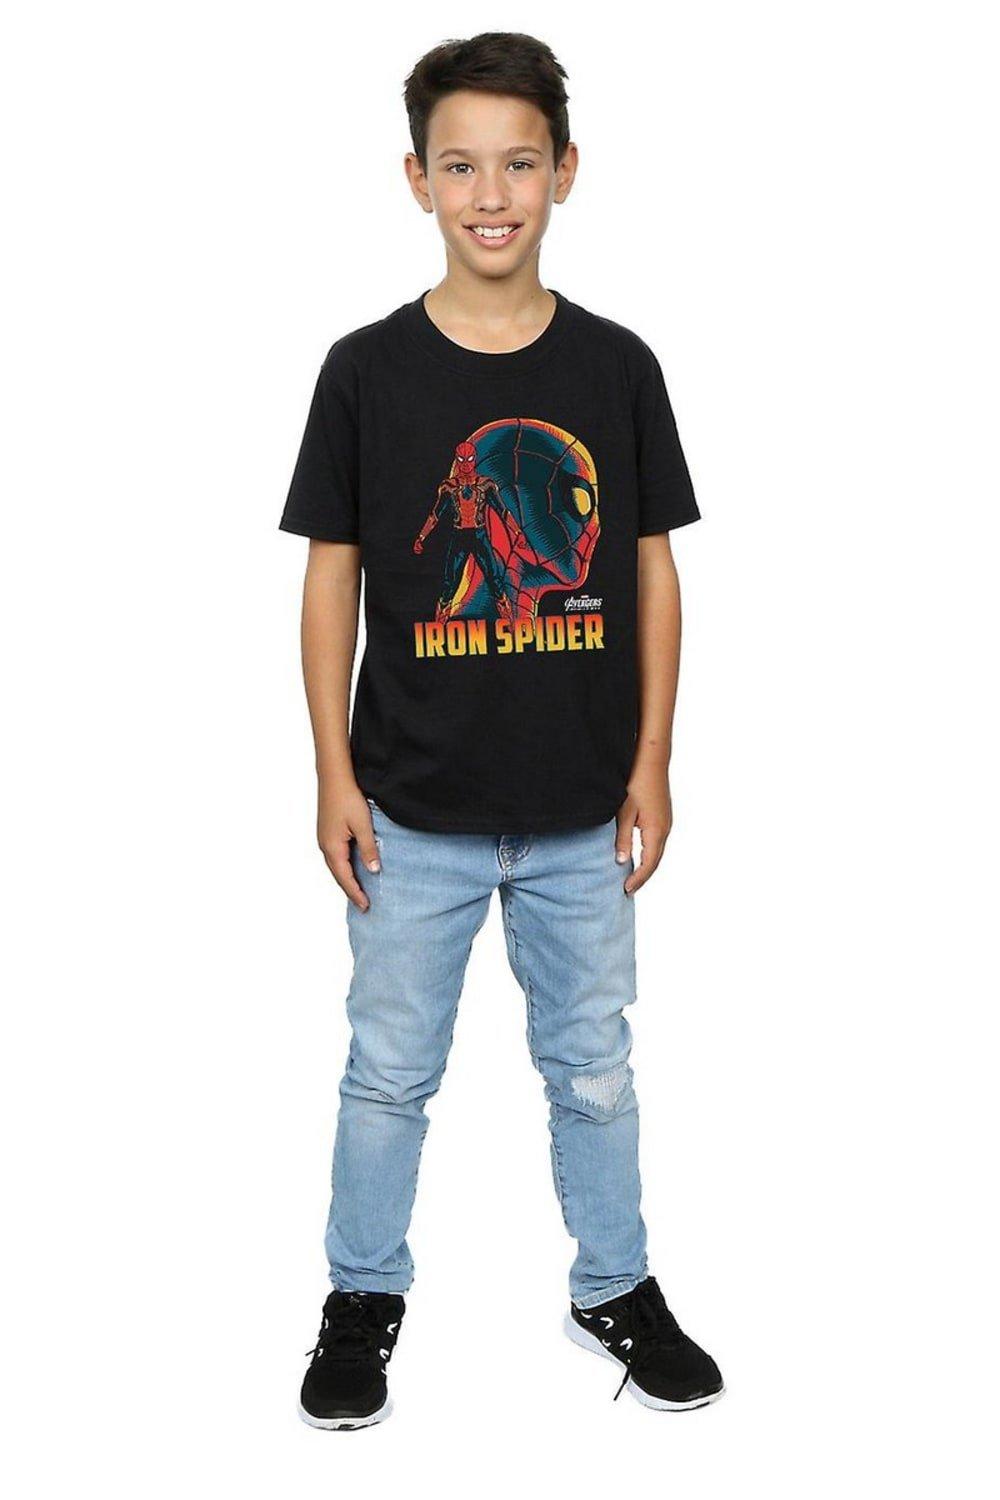 Iron Spider Character T-Shirt